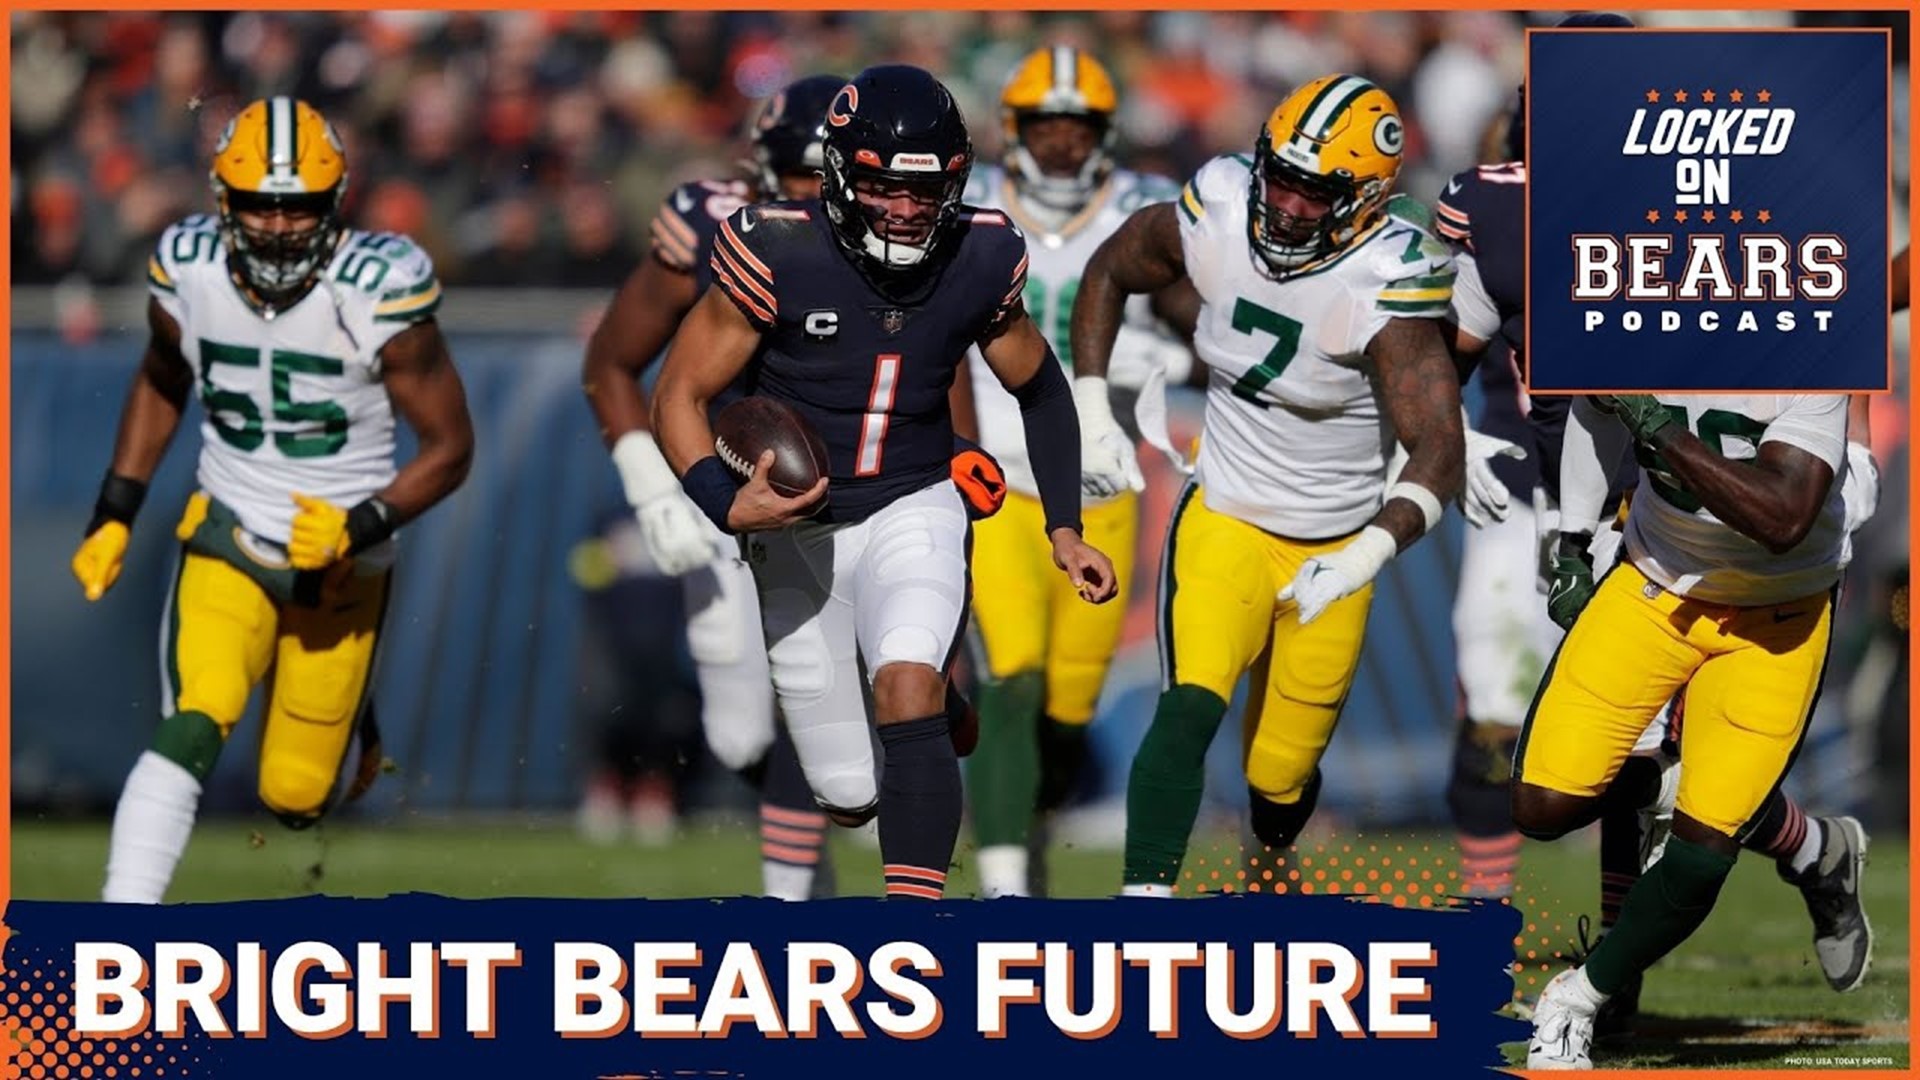 Ryan Poles has built the Chicago Bears with the long-term future mind, but how well has he actually done that?